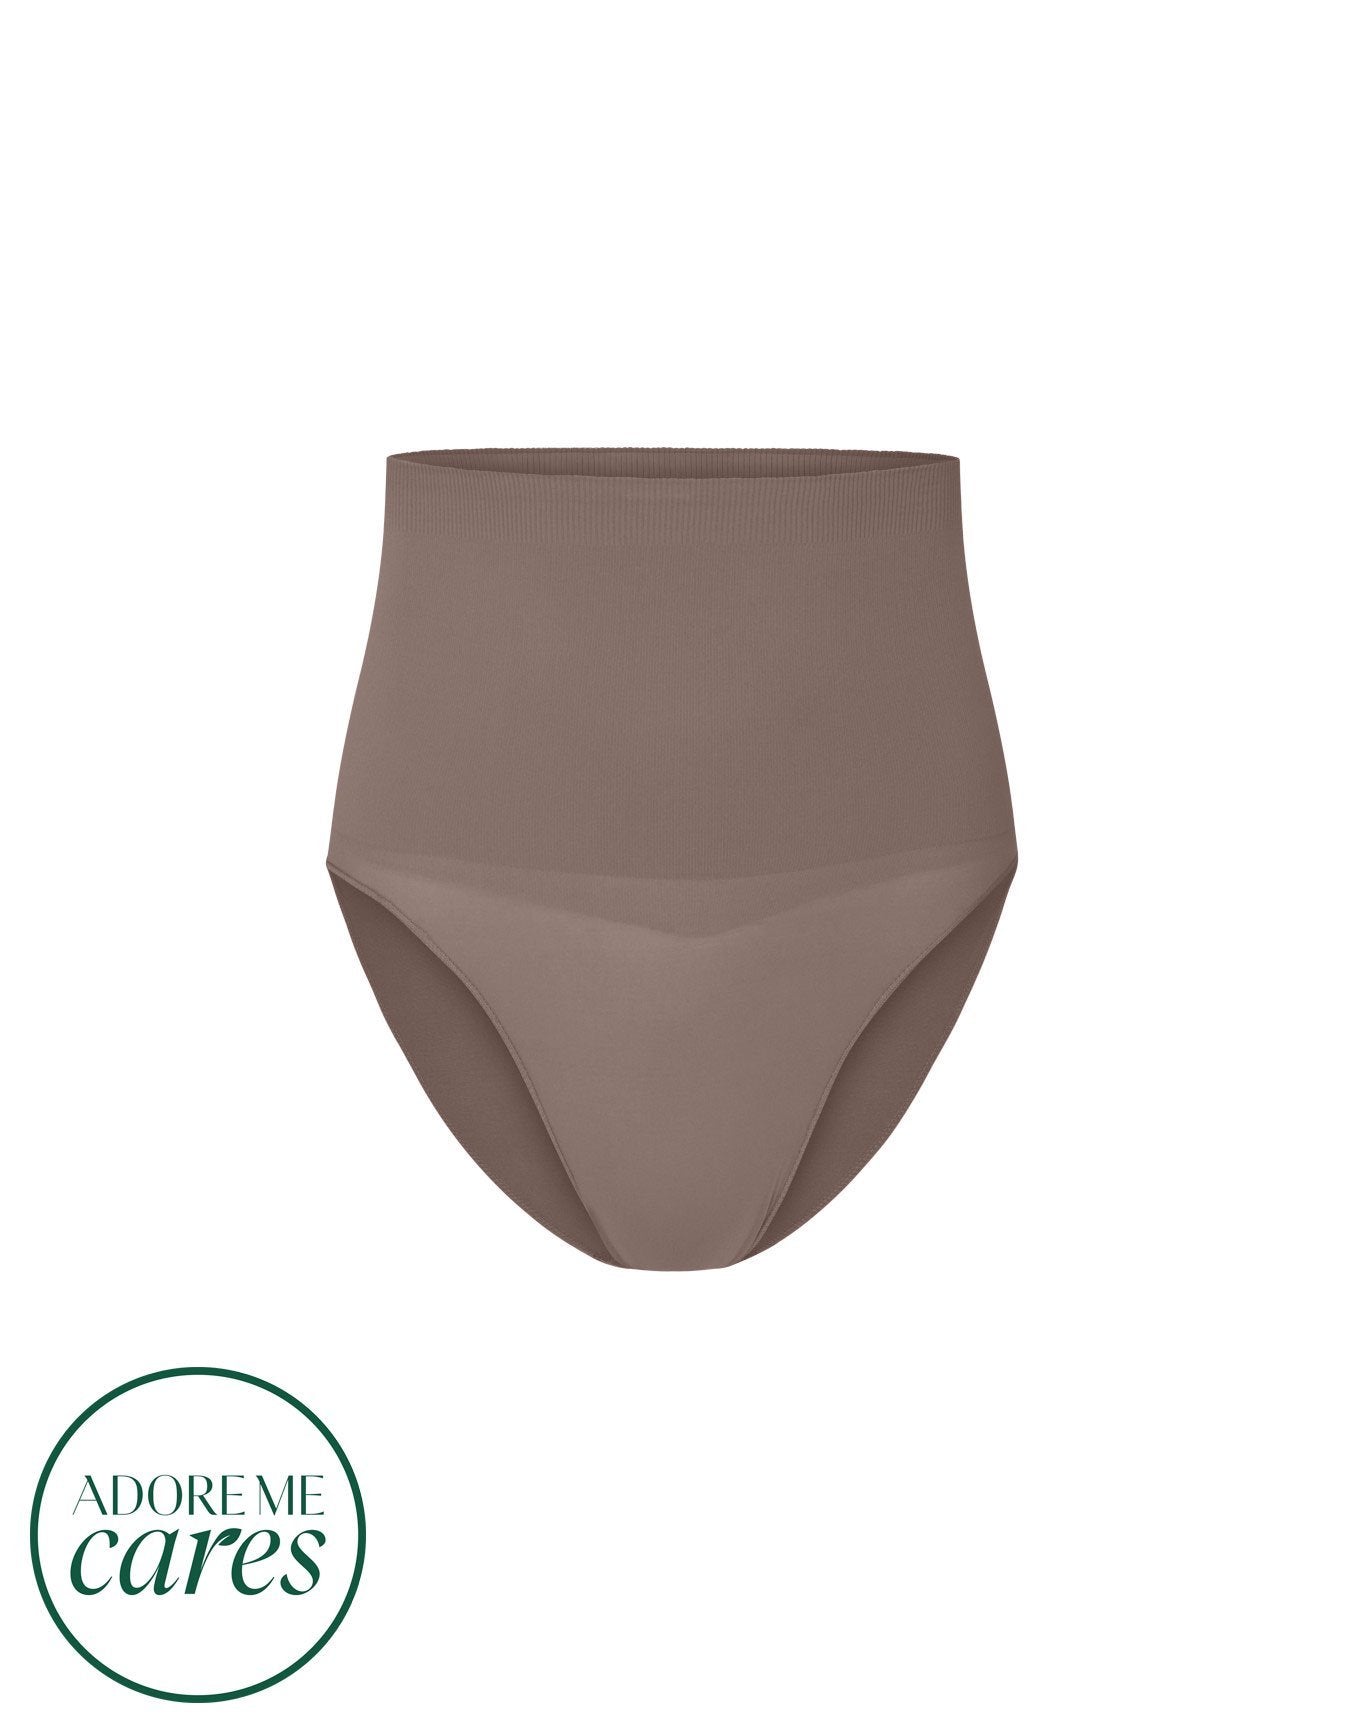 nueskin Hayley High-Compression High-Waist Bikini Brief in color Deep Taupe and shape high waisted